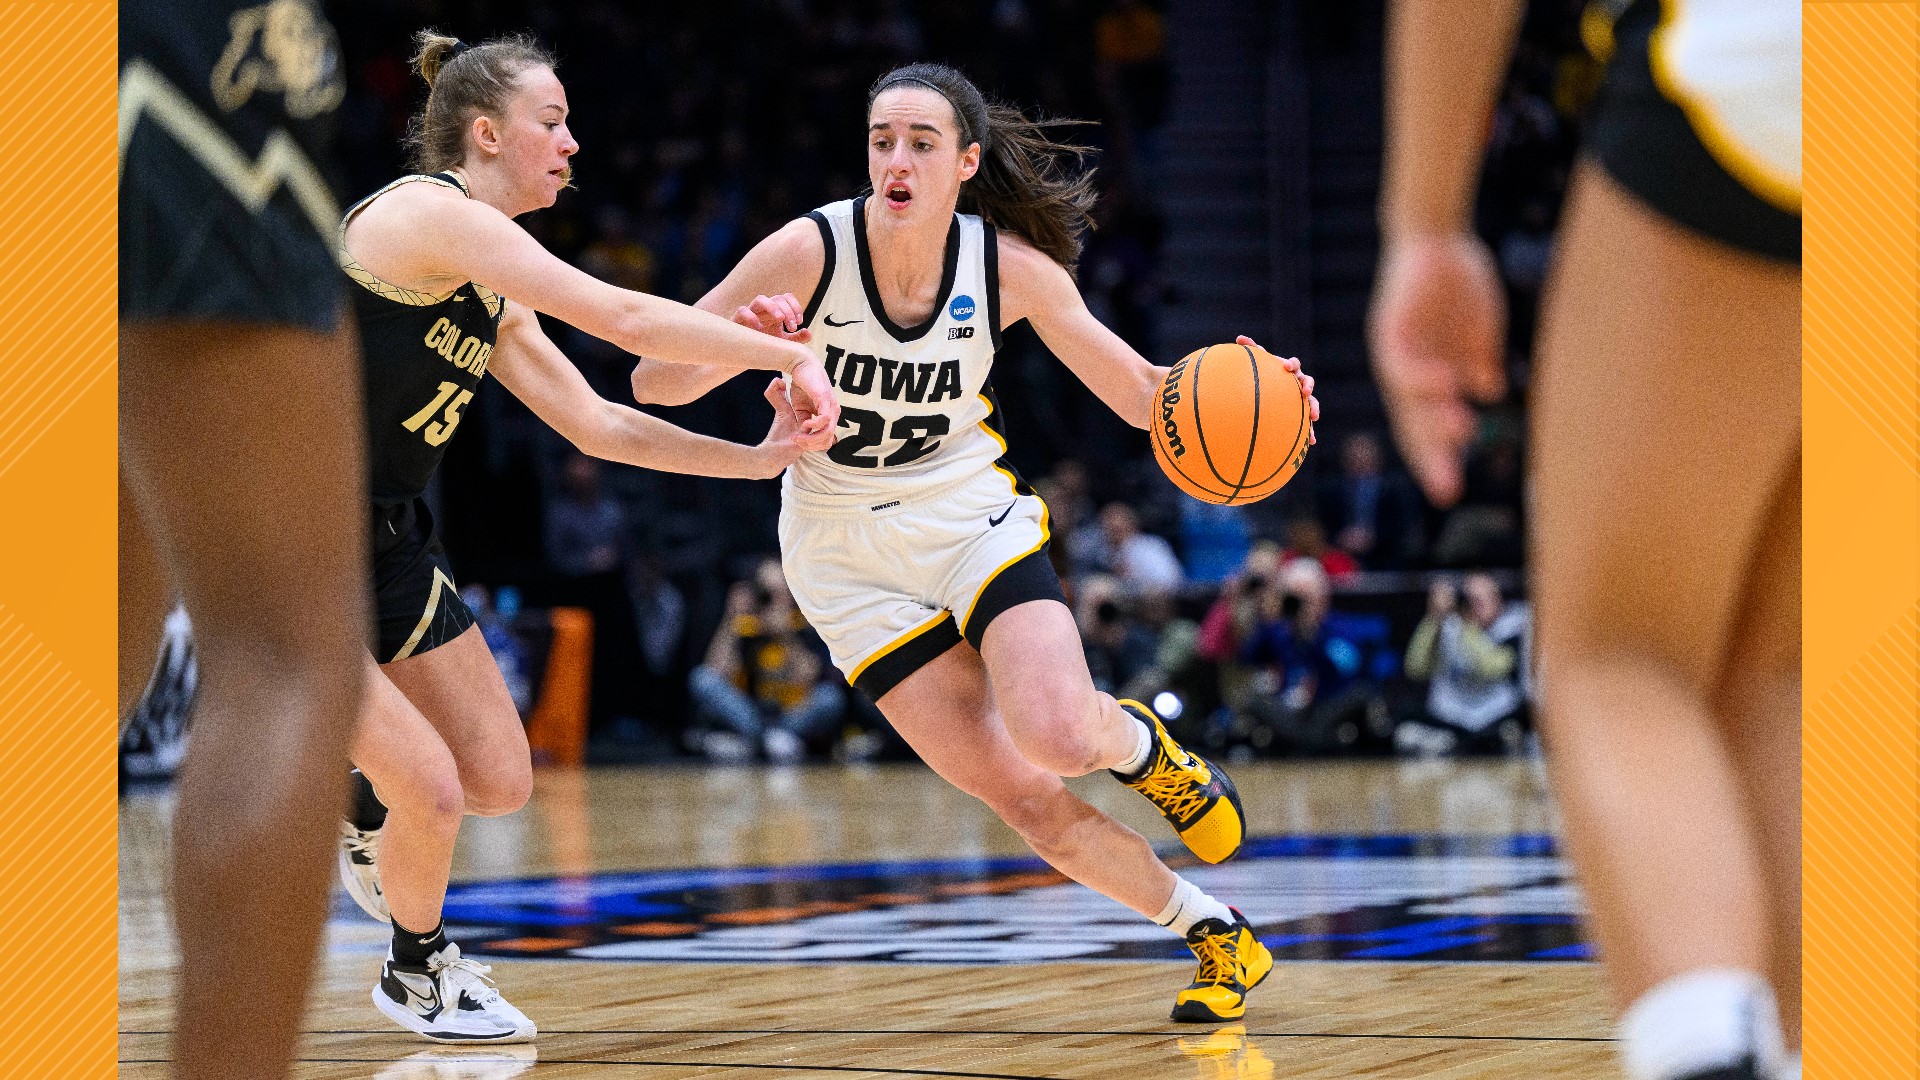 Local 5's Reina Garcia answers some of the big questions about Iowa's Sweet 16 victory and upcoming Elite Eight showdown.